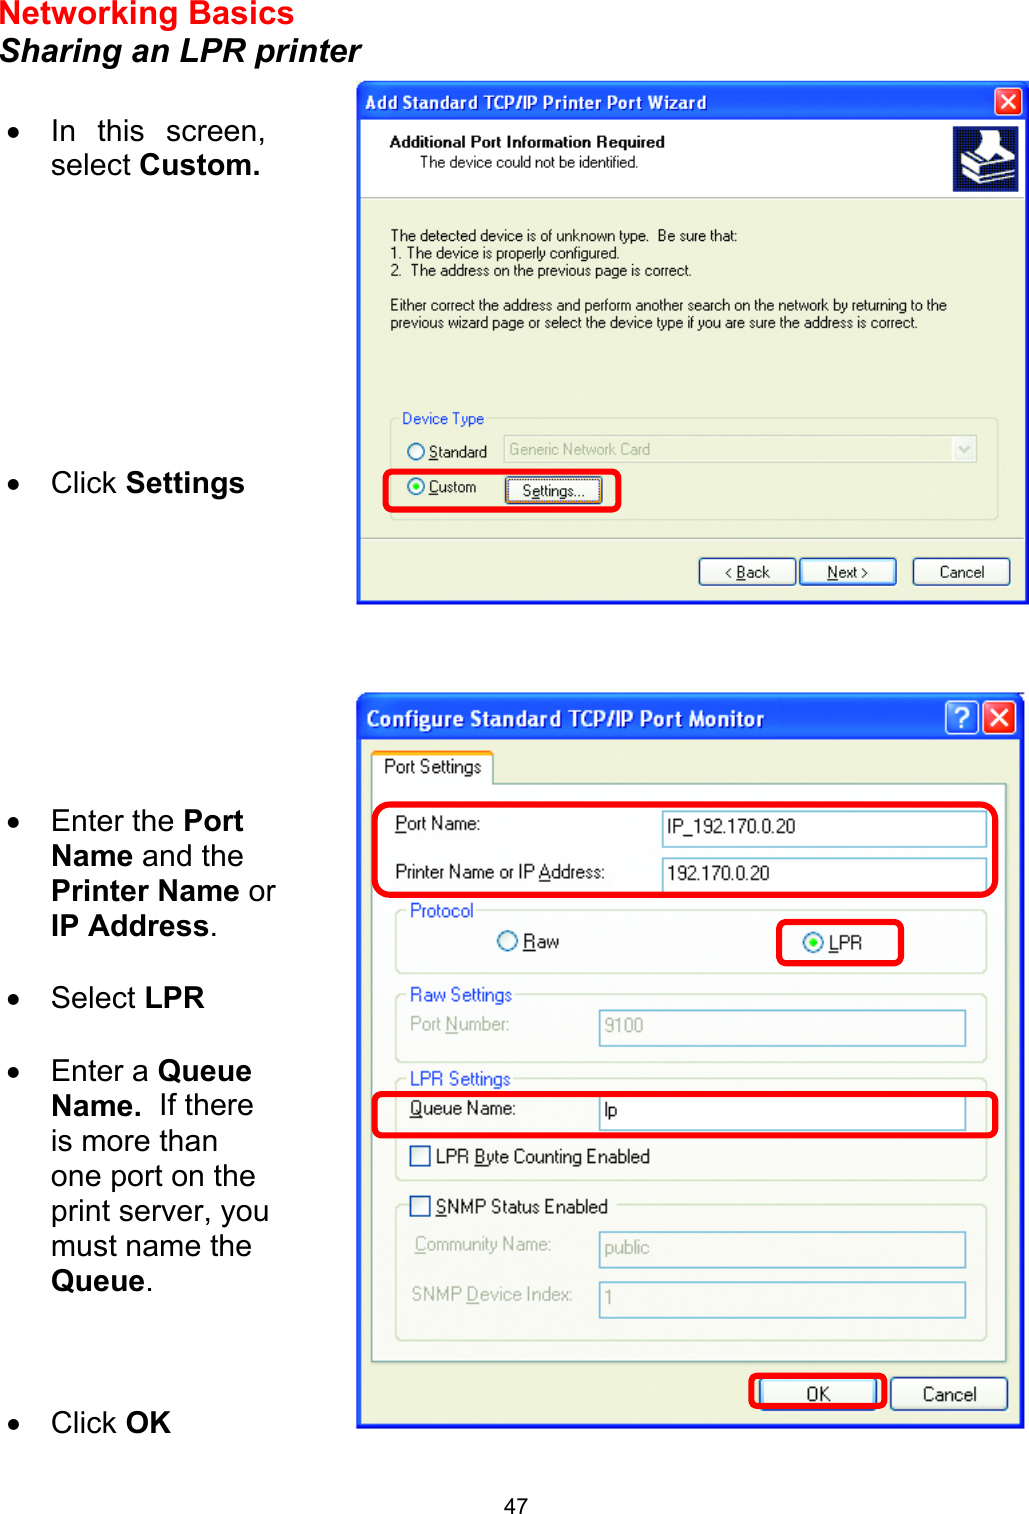  47Networking Basics  Sharing an LPR printer       •  In this screen, select Custom.         •  Click Settings •  Enter the Port Name and the Printer Name or IP Address.  •  Select LPR  •  Enter a Queue Name.  If there is more than one port on the print server, you must name the Queue.    •  Click OK 